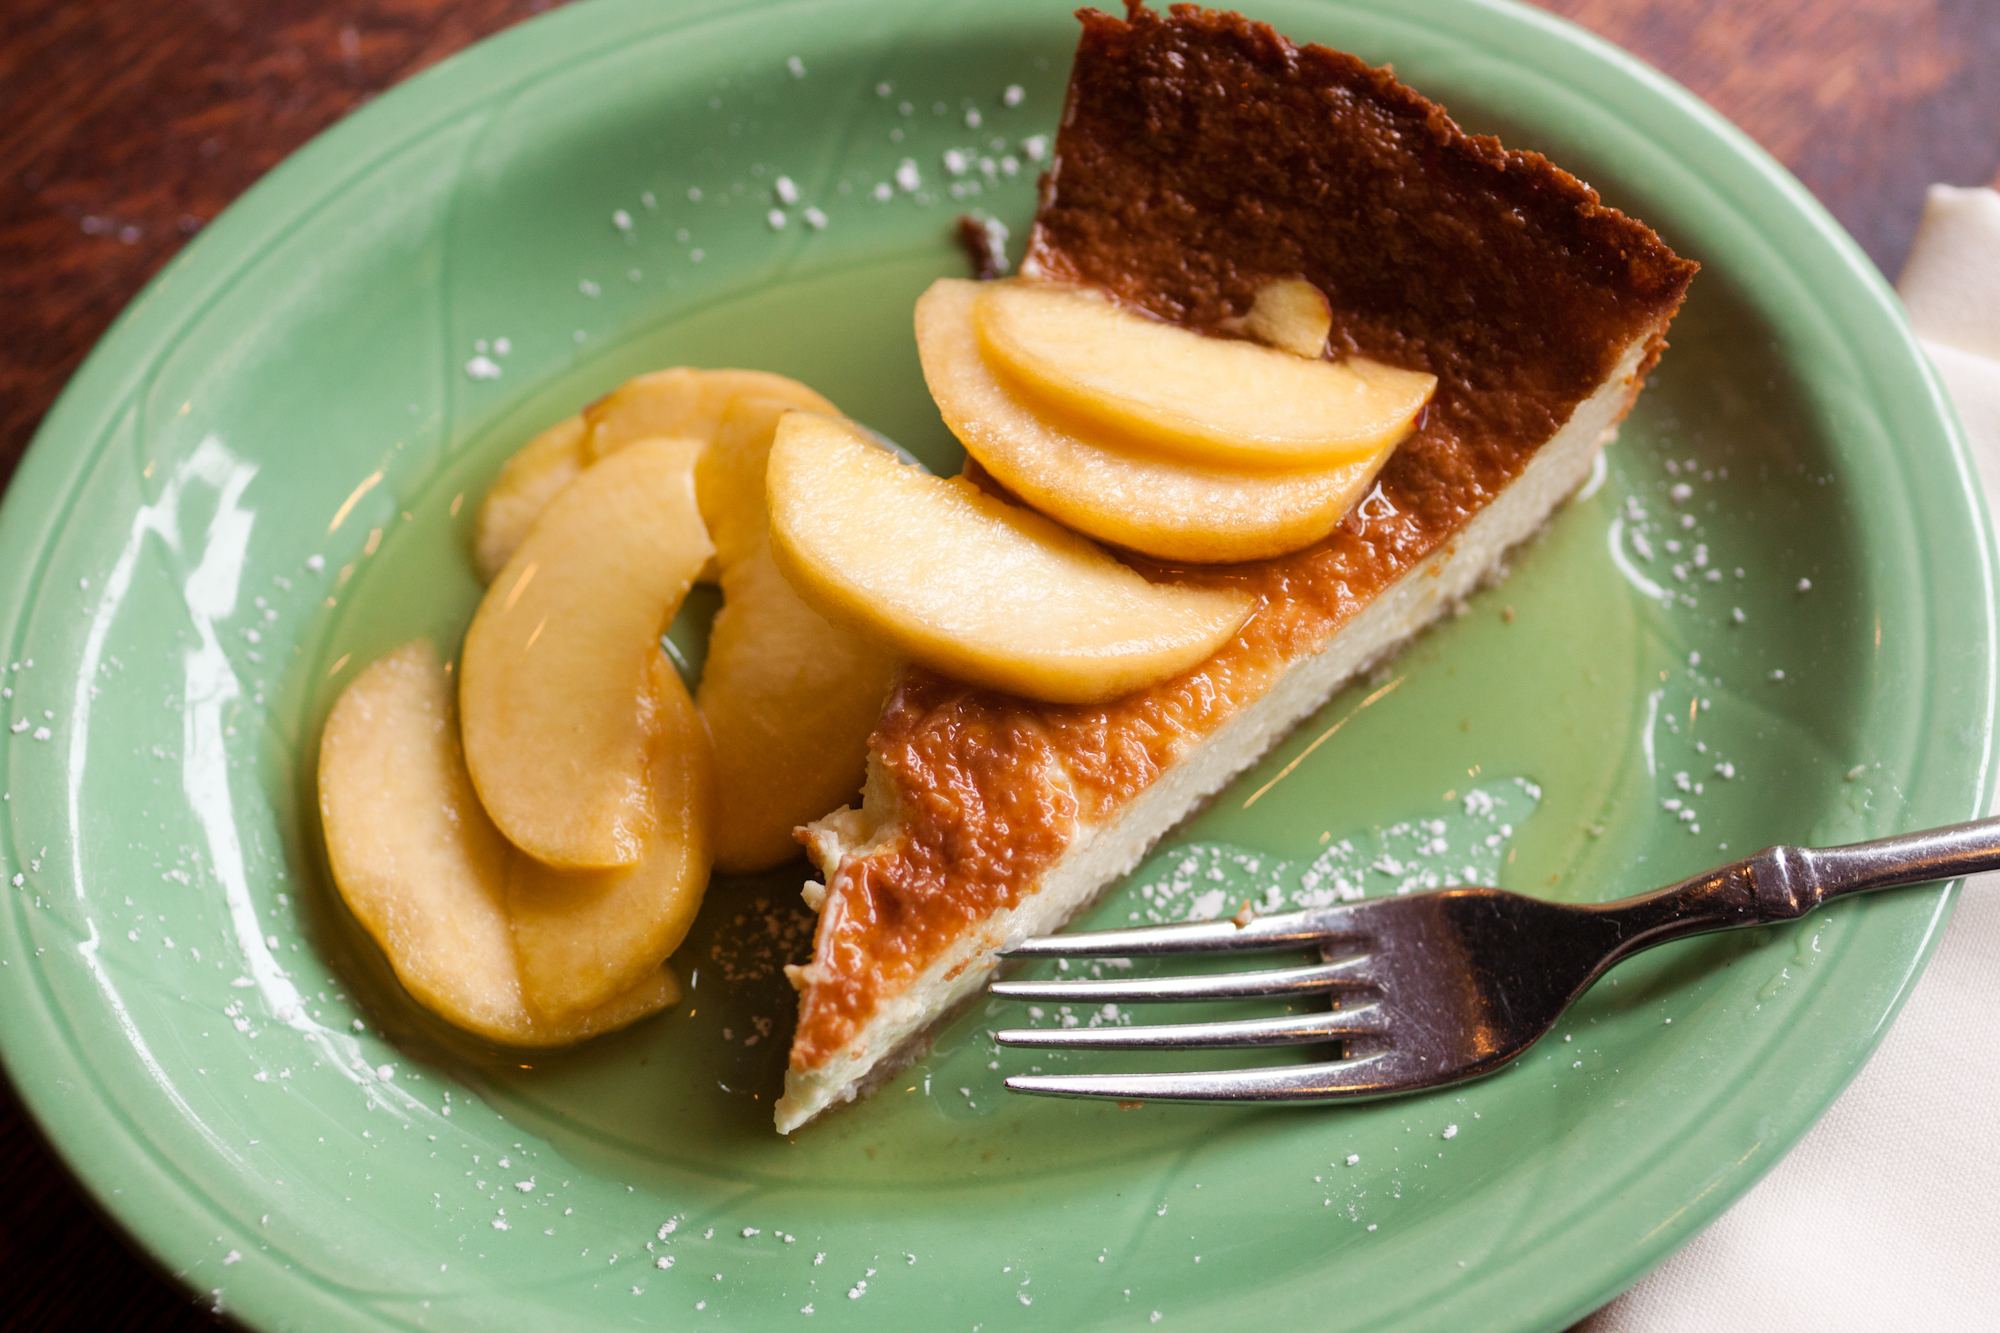 A slice of ricotta and caprino cheese cake with sliced peaches in honey on a green plate